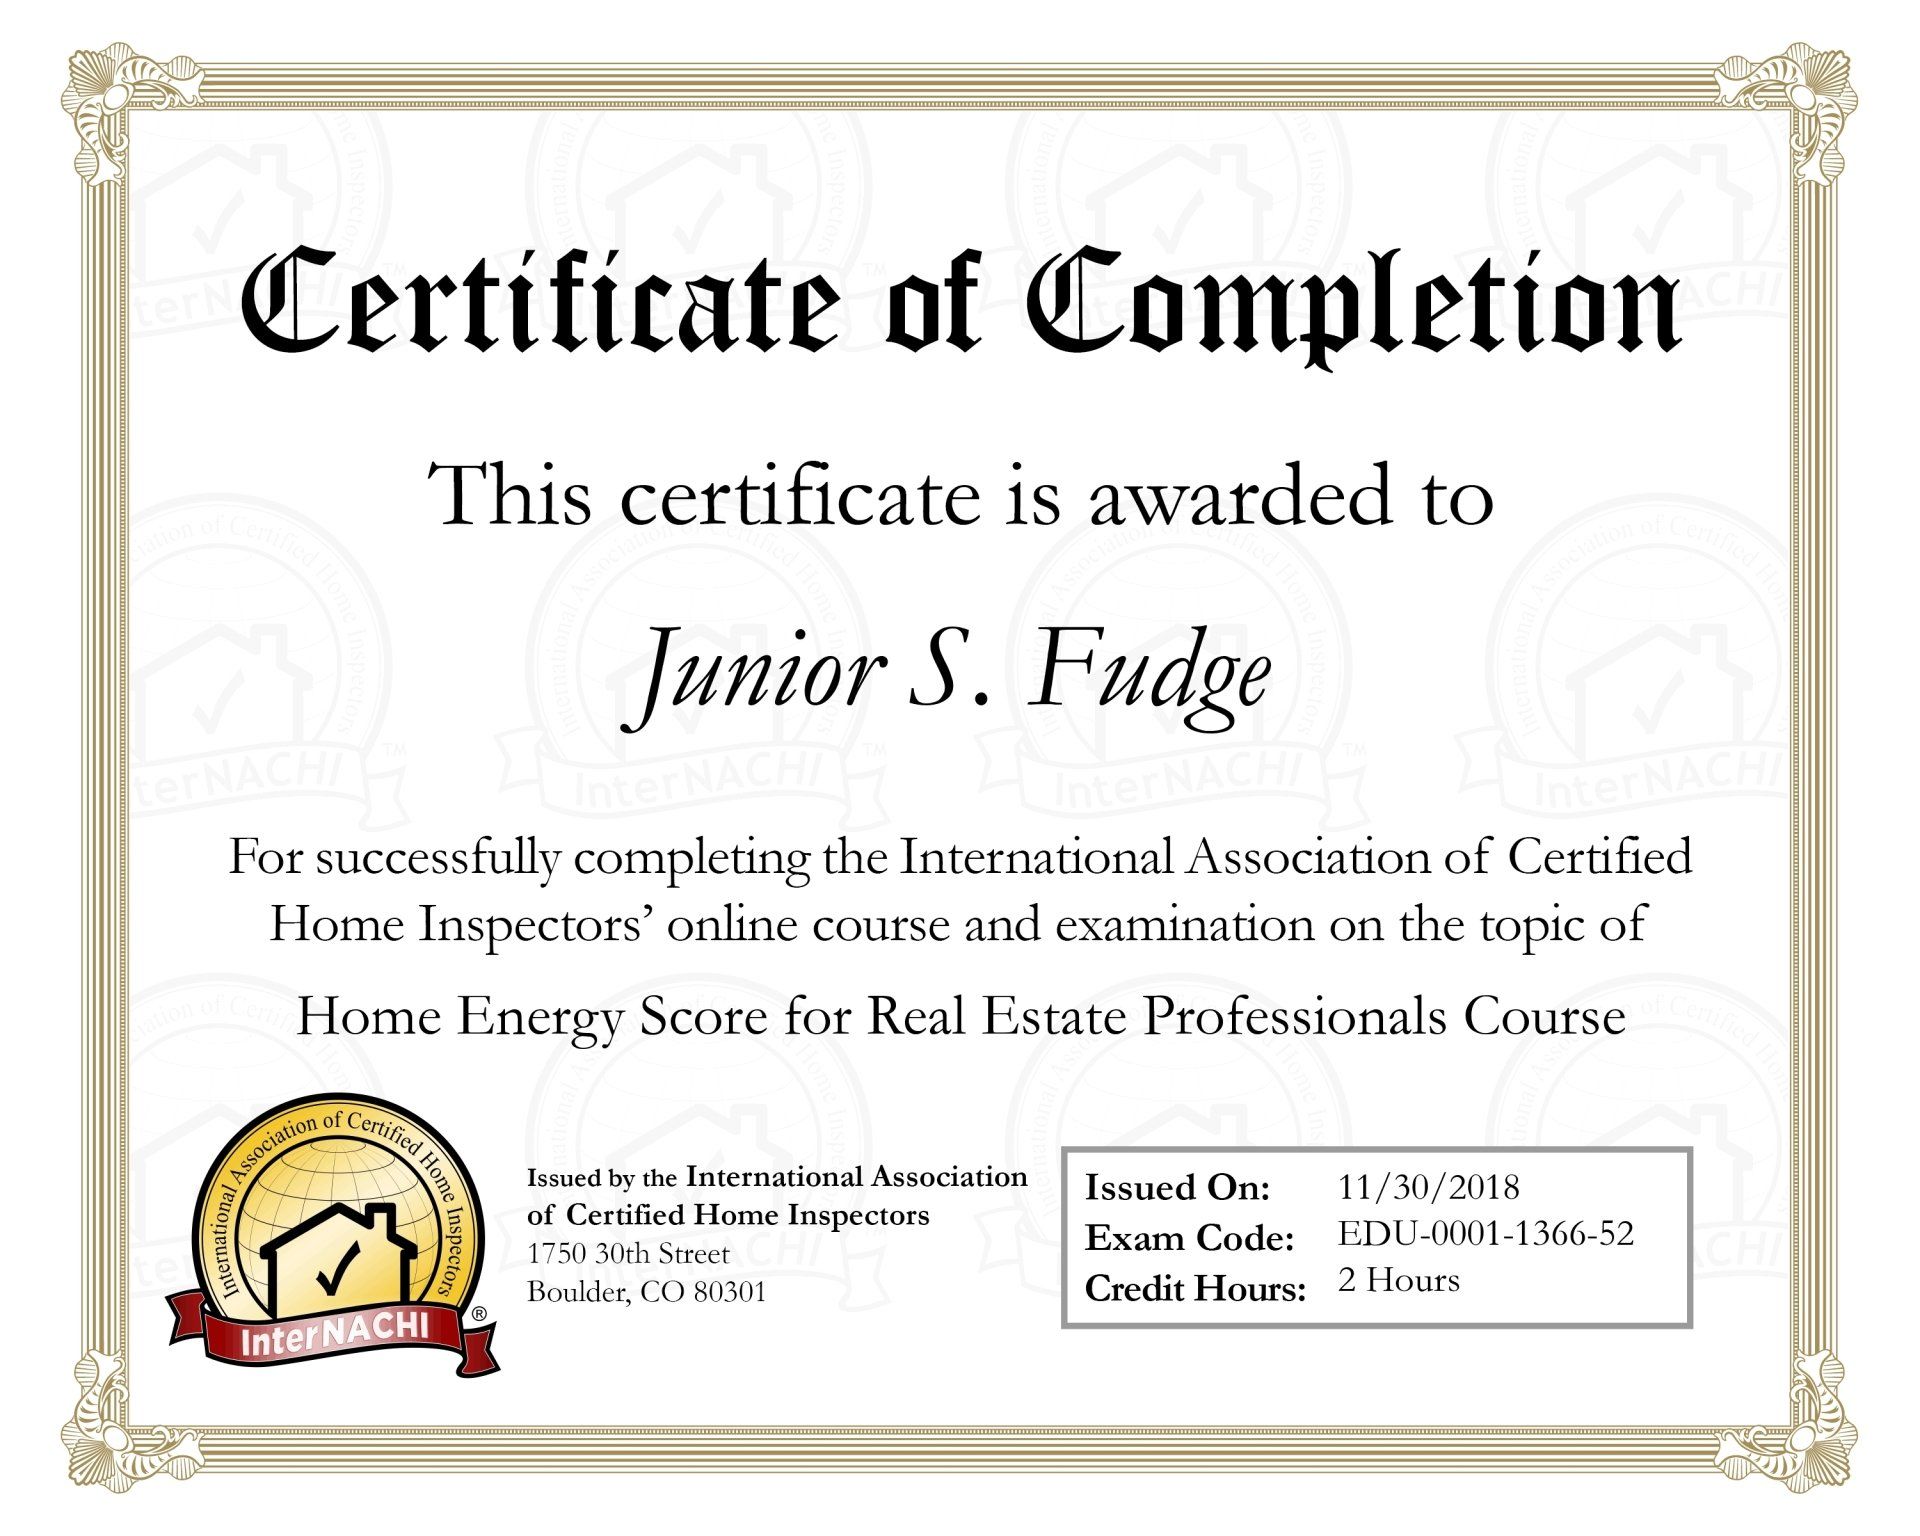 Home energy score for real estate professionals - PEI home inspector